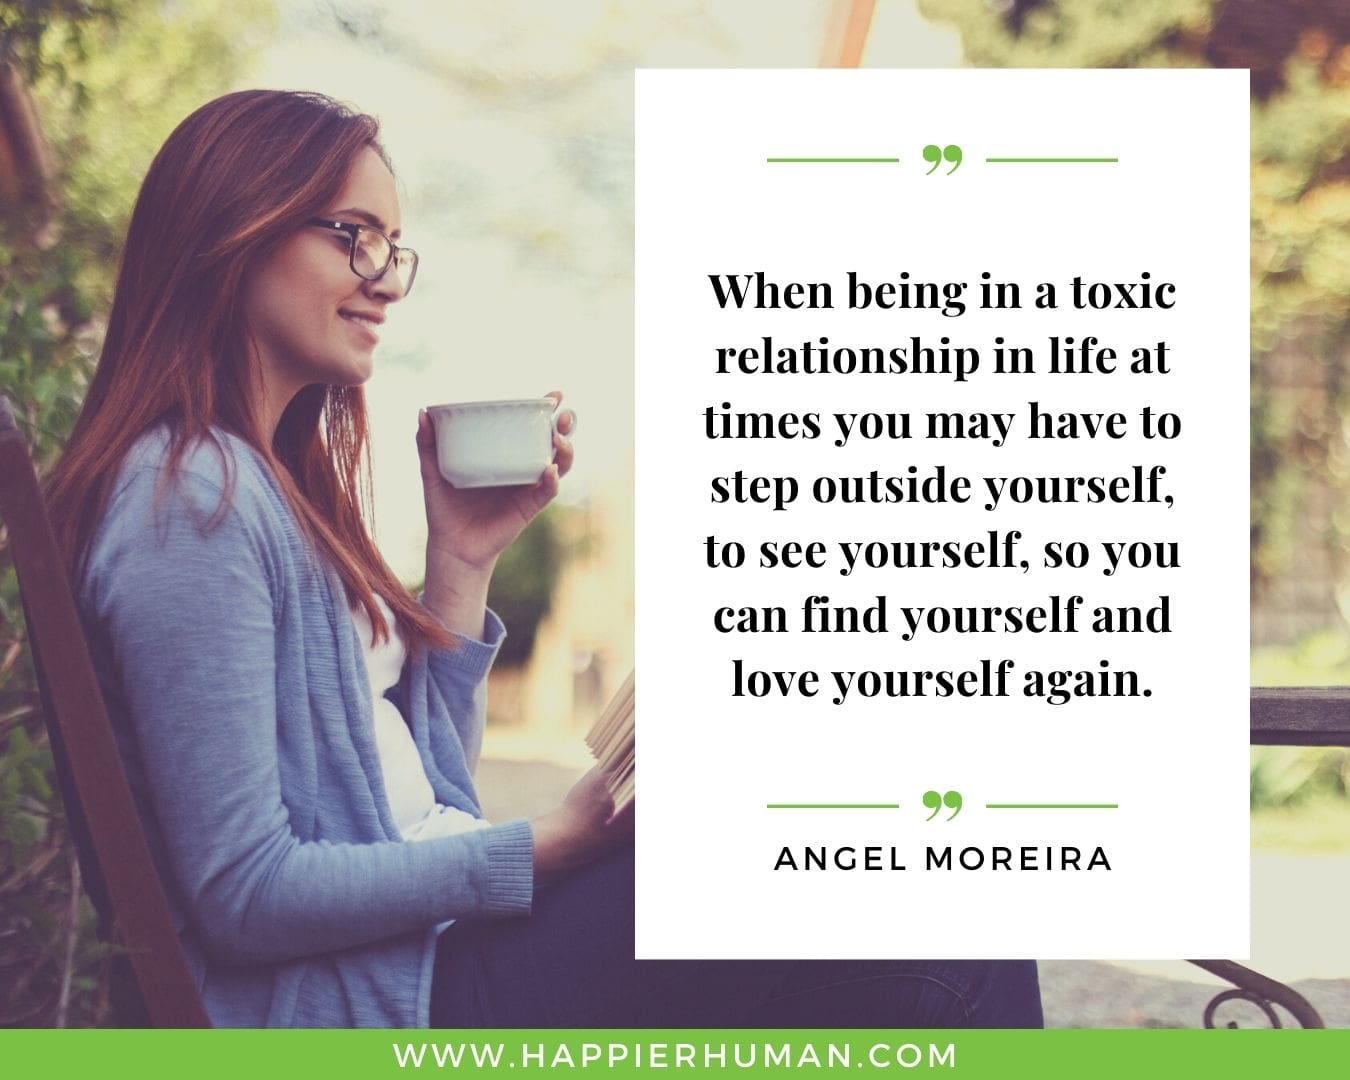 Toxic People Quotes - “When being in a toxic relationship in life at times you may have to step outside yourself, to see yourself, so you can find yourself and love yourself again.” – Angel Moreira